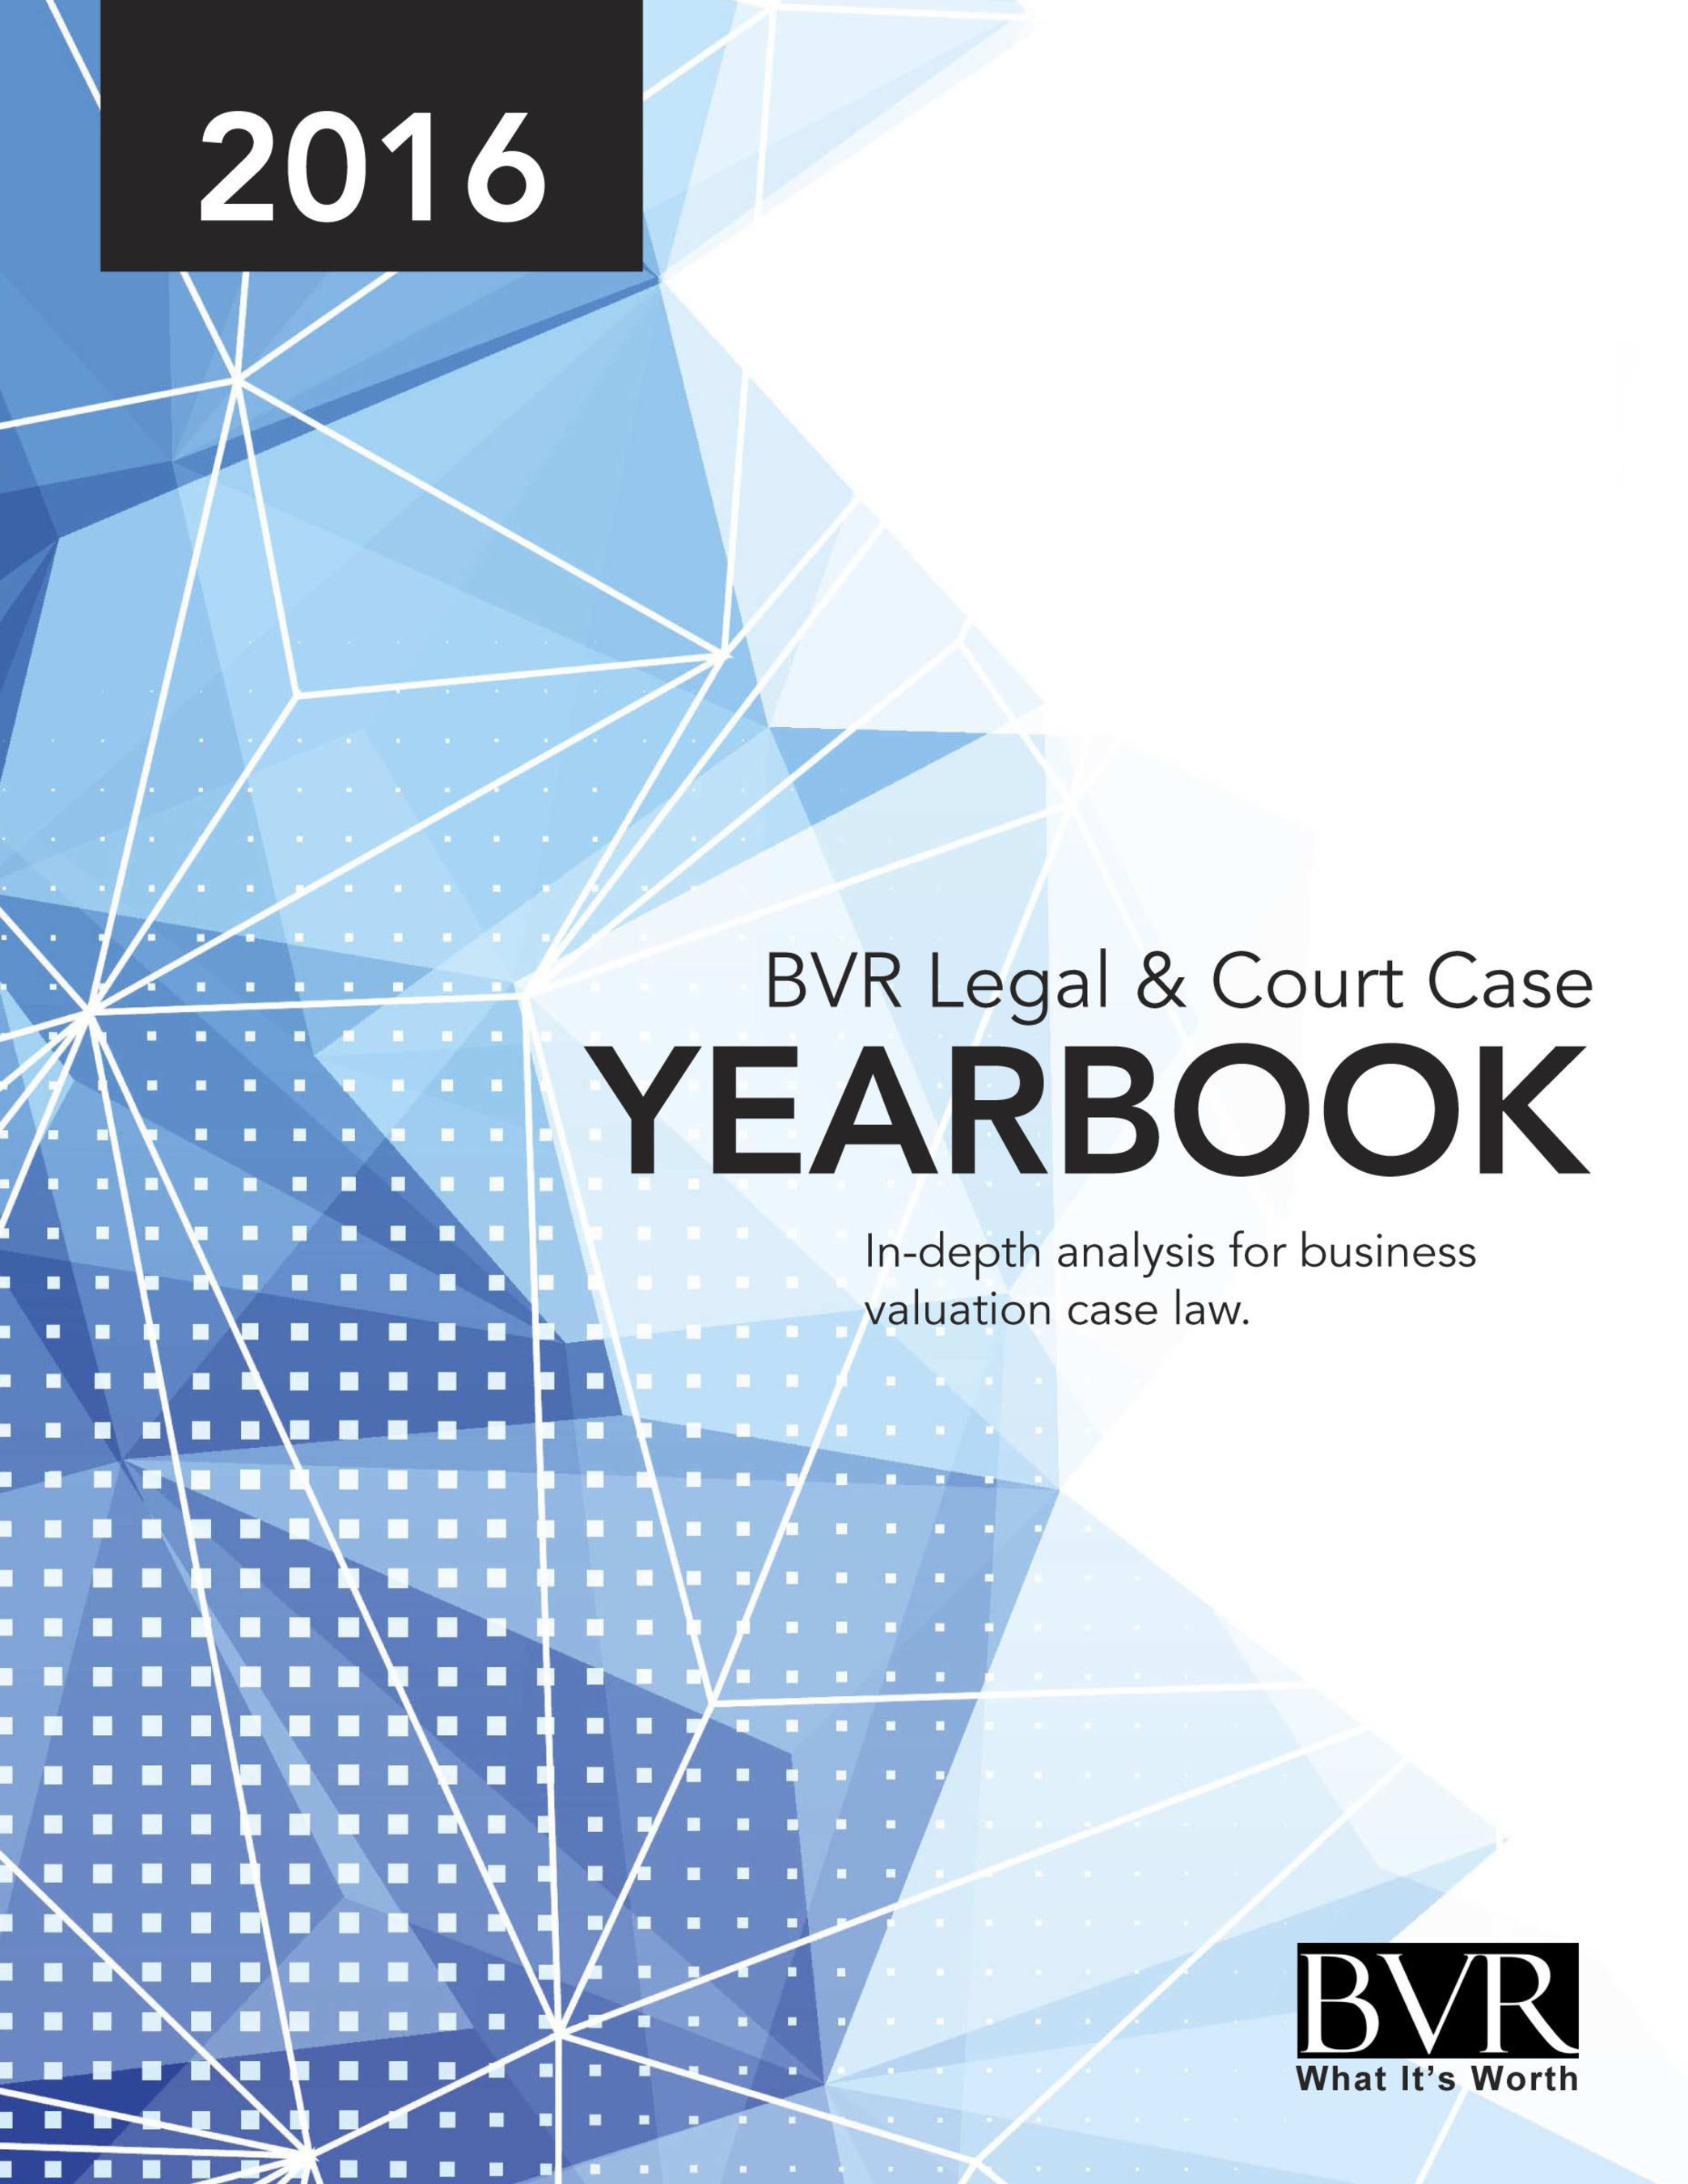 The 2016 BVR Legal and Court Case Yearbook includes nearly 100 digested business valuation cases.